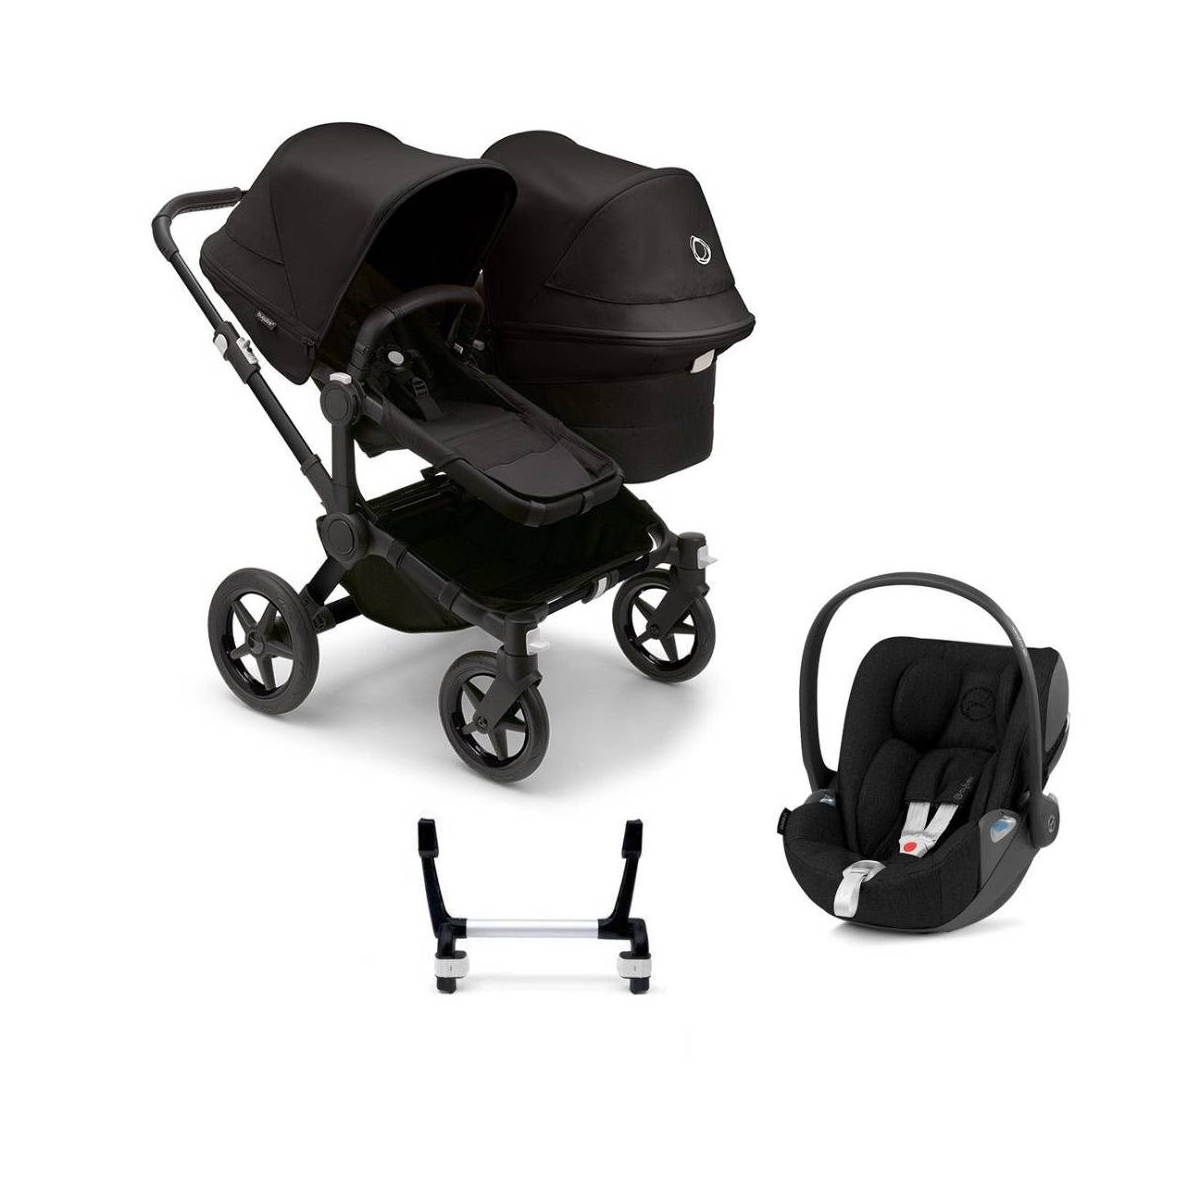 Buagboo Donkey 5 Duo (Cloud Z) Travel System Bundle